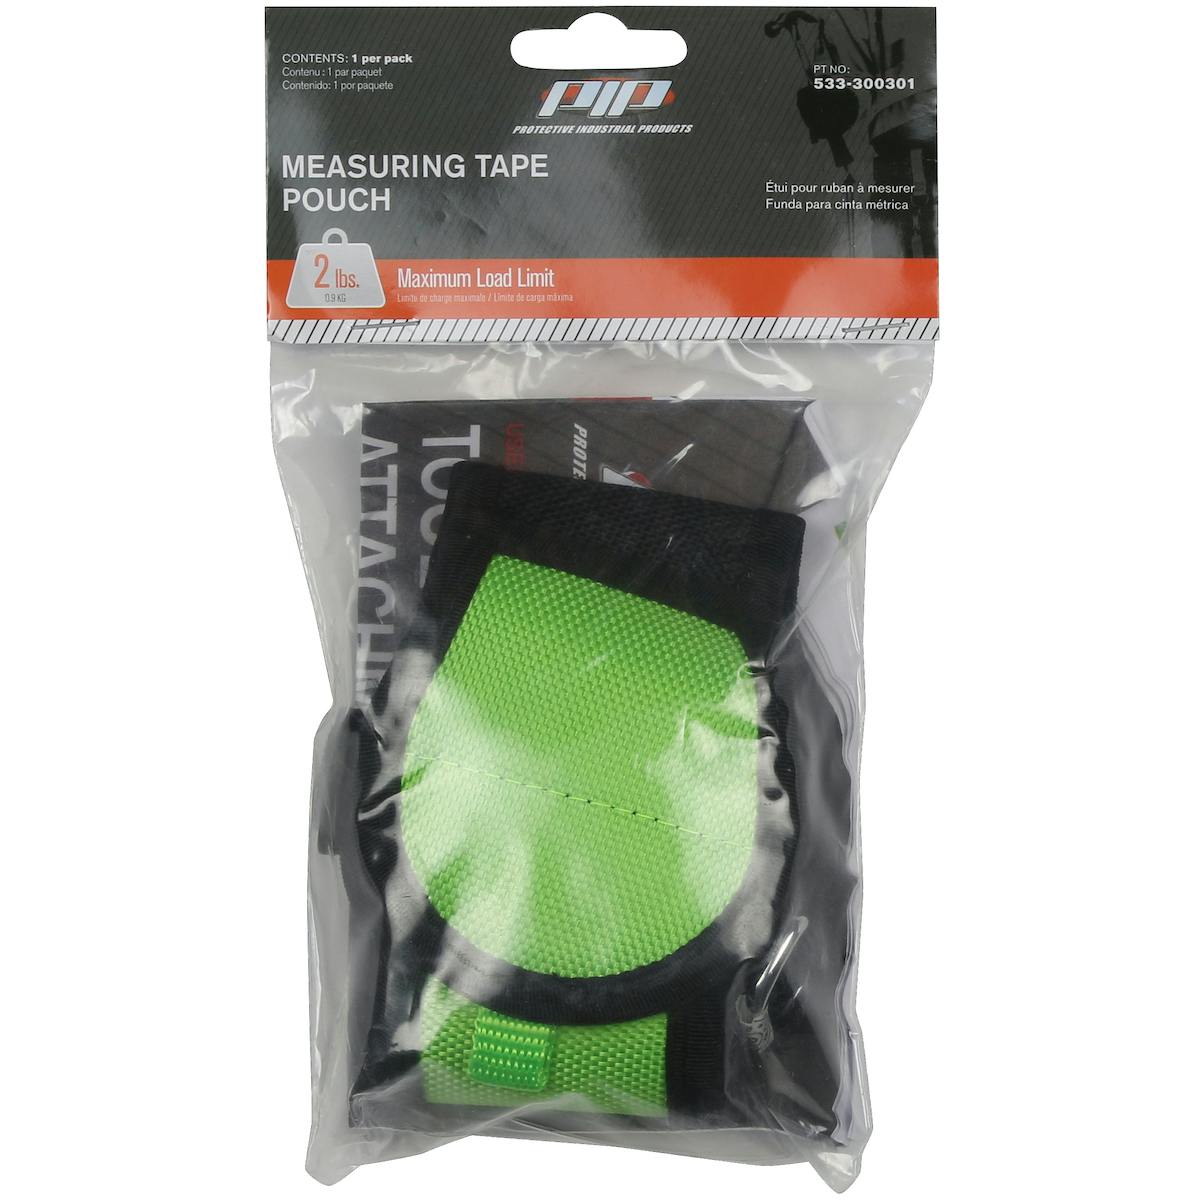 Measuring Tape Pouch - 2 lbs. maximum load limit - Retail Packaged, Lime (533-300301) - OS_0